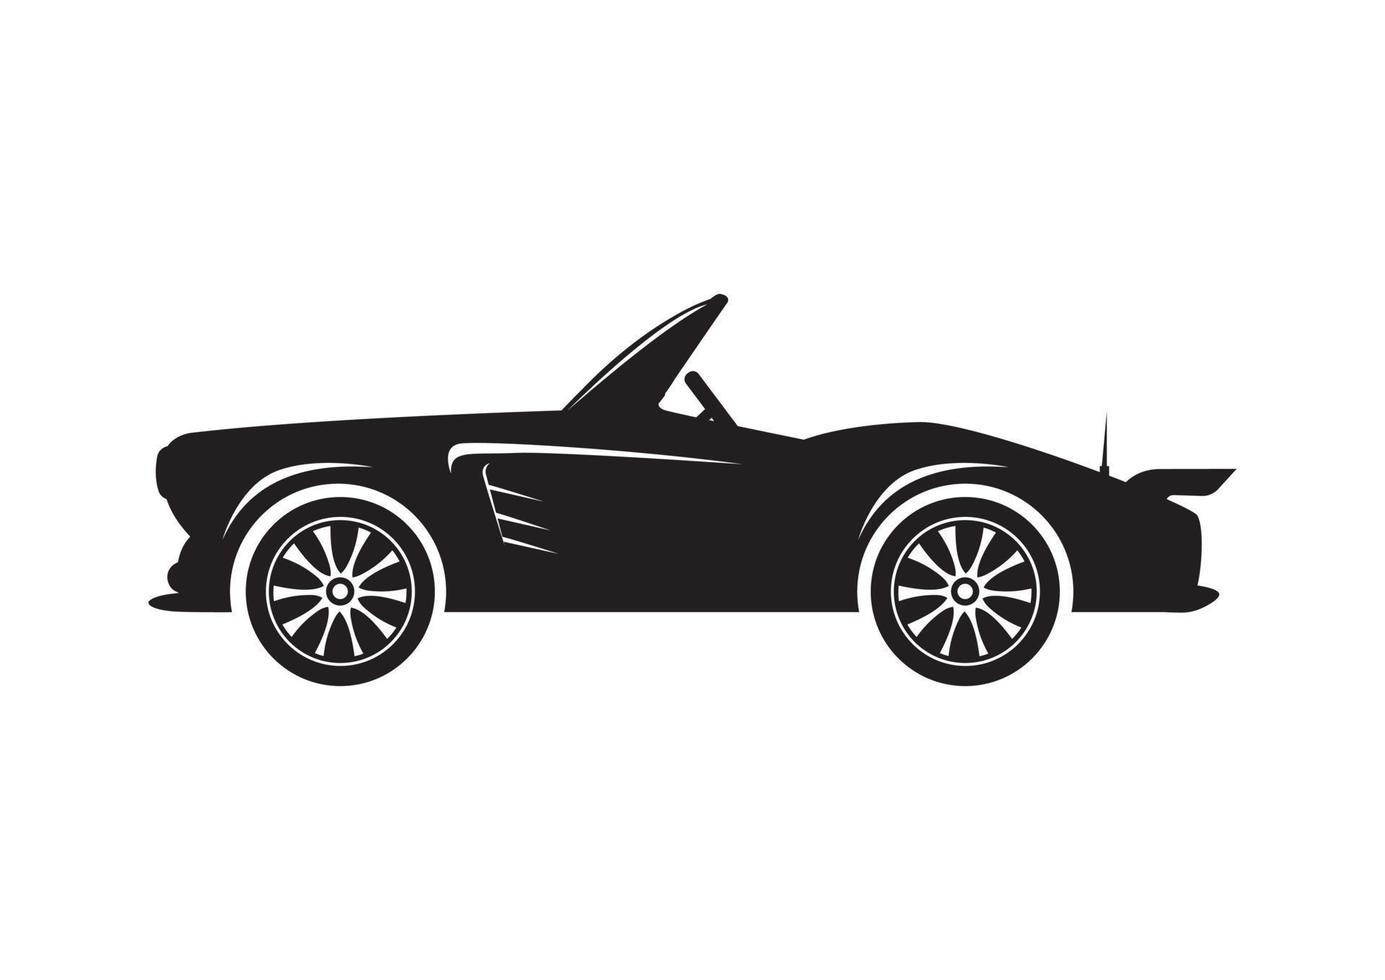 Black and white classic old car in a flat style. Vector illustration